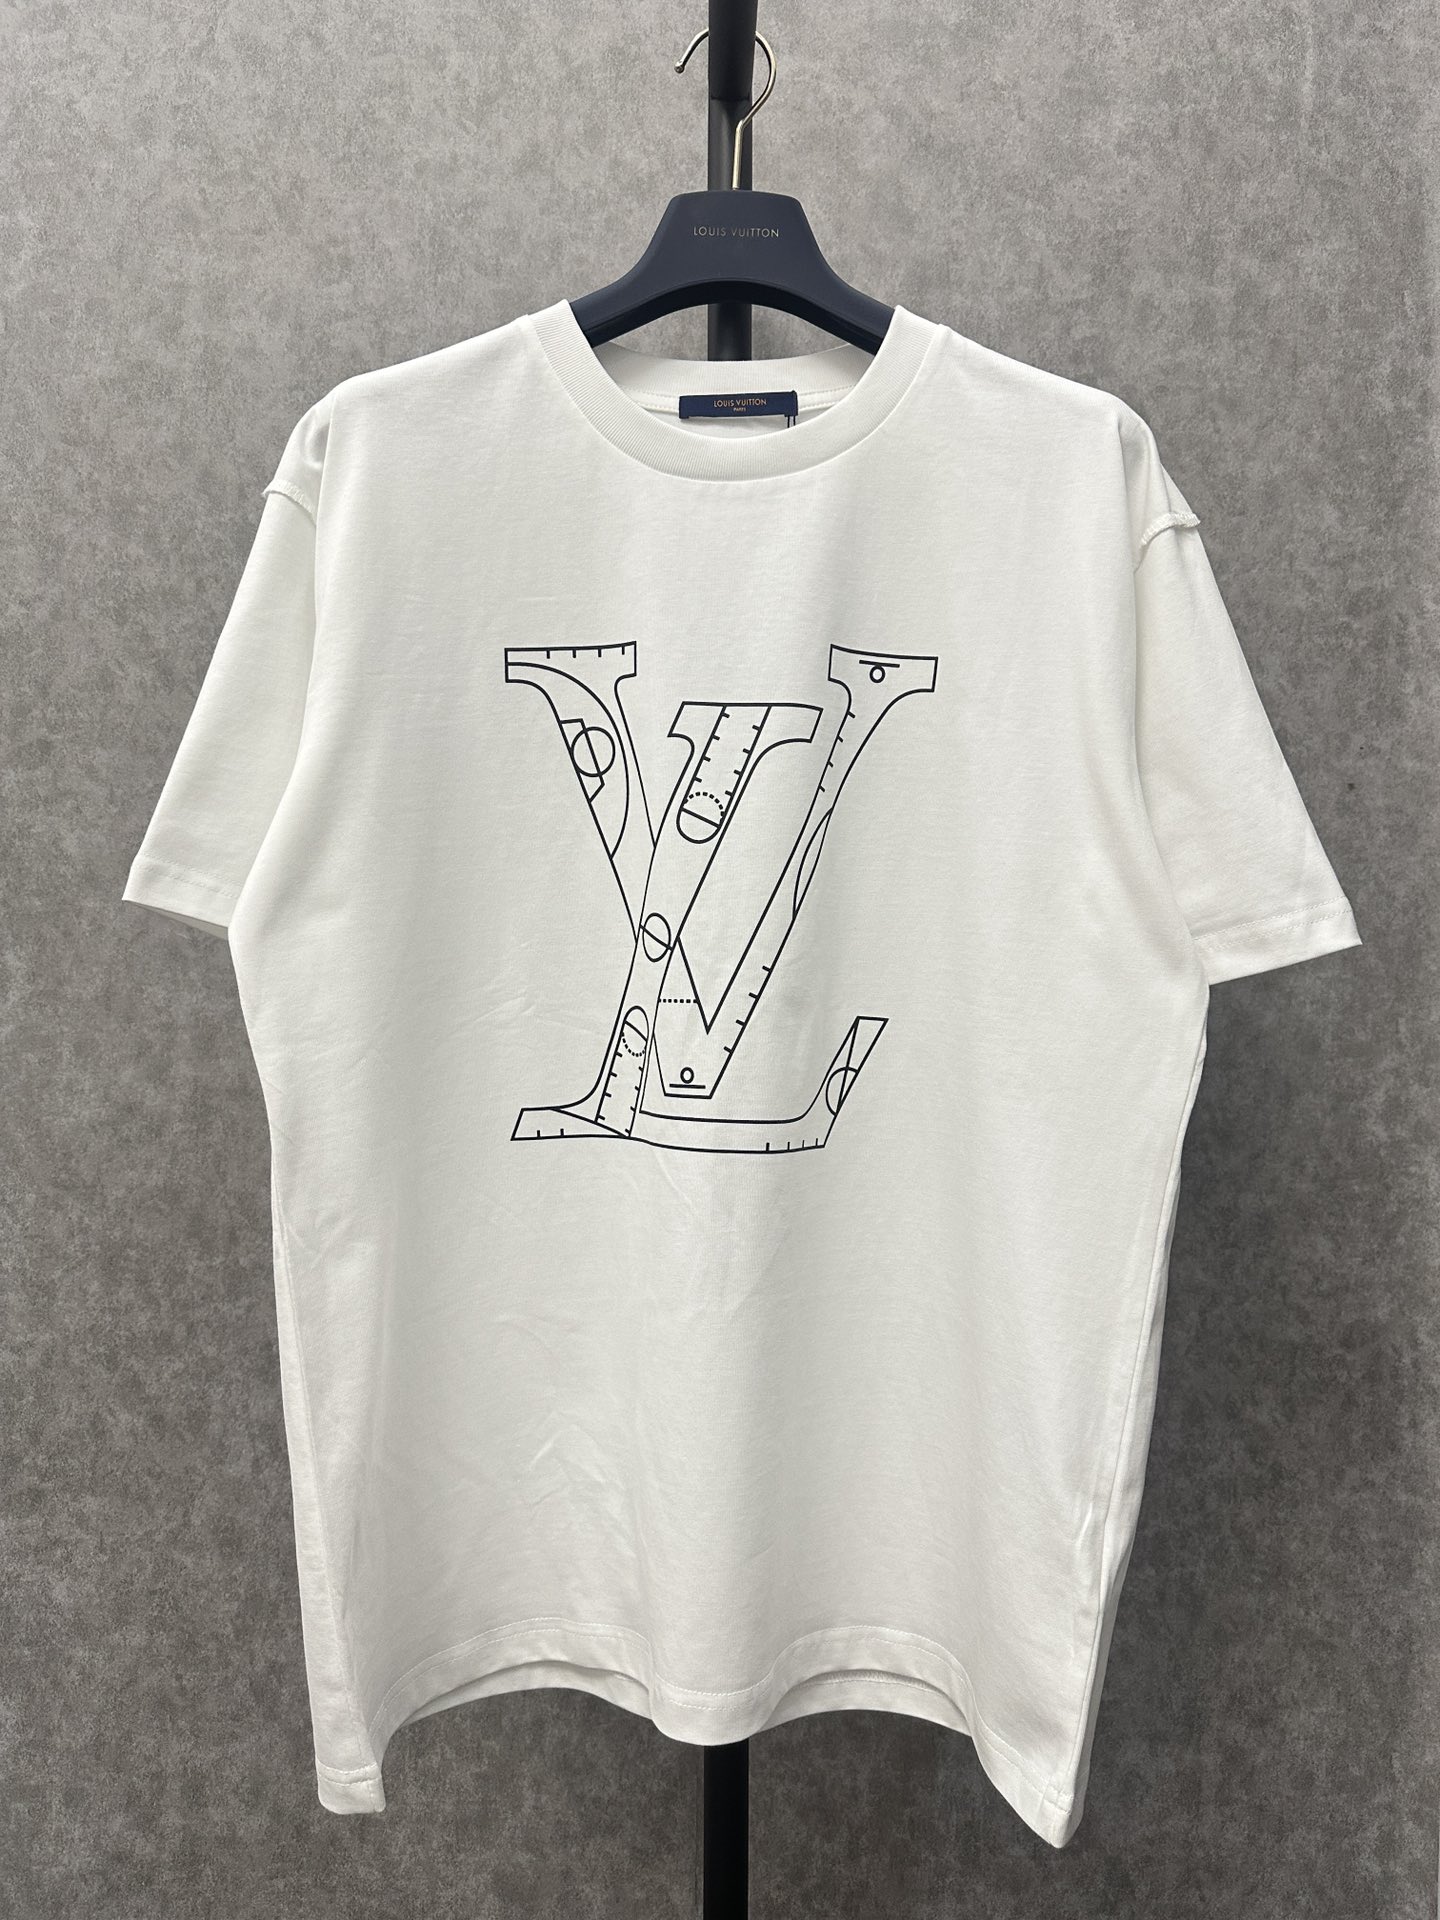 Louis Vuitton Clothing T-Shirt White Printing Unisex Cotton Spring/Summer Collection Short Sleeve